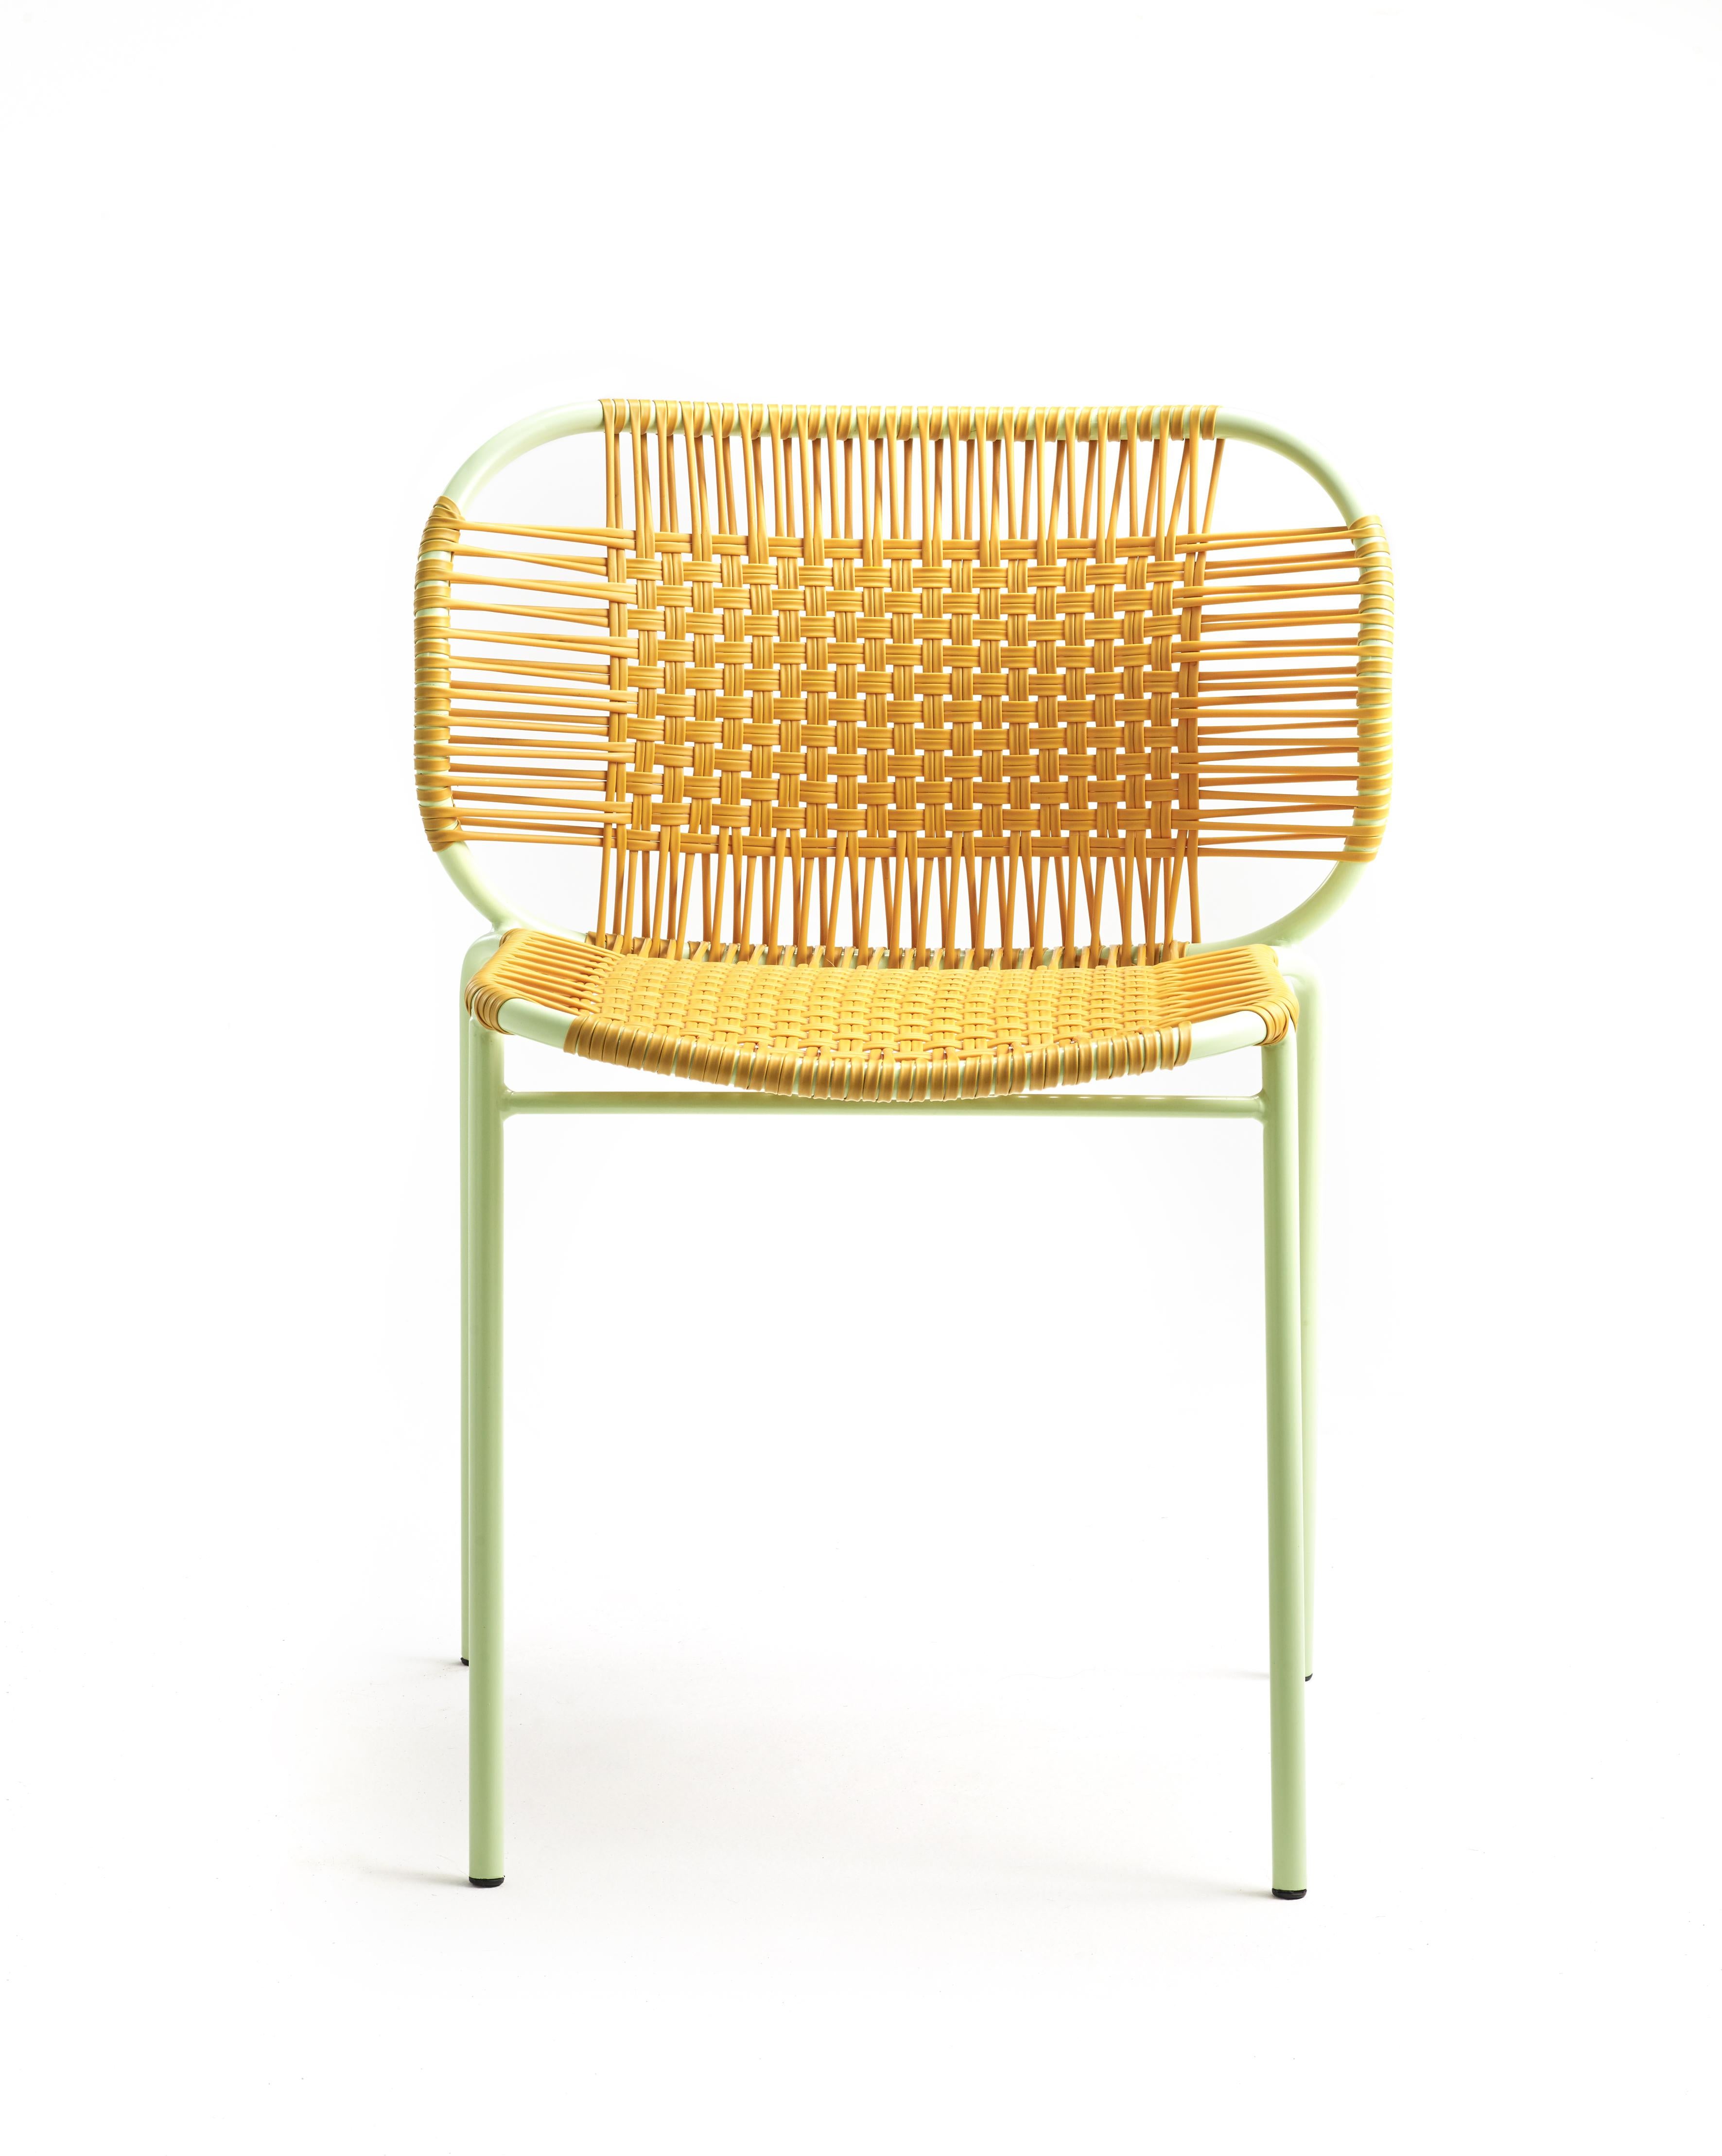 Honey Cielo stacking chair by Sebastian Herkner
Materials: PVC strings, powder-coated steel frame. 
Technique: Made from recycled plastic and weaved by local craftspeople in Cartagena, Colombia. 
Dimensions: W 56 x D 51.4 x H 78 cm 
Also available